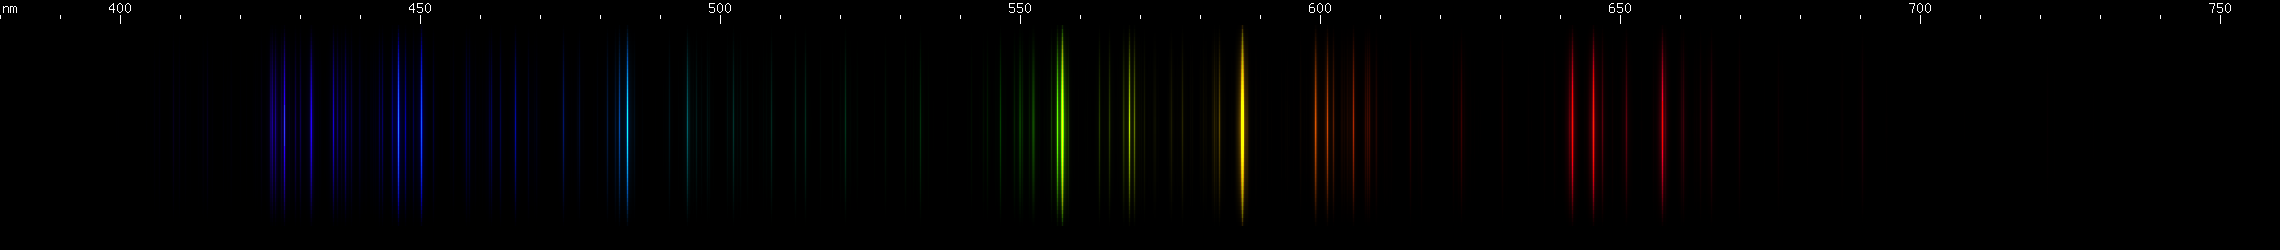 Spectral lines of Krypton.